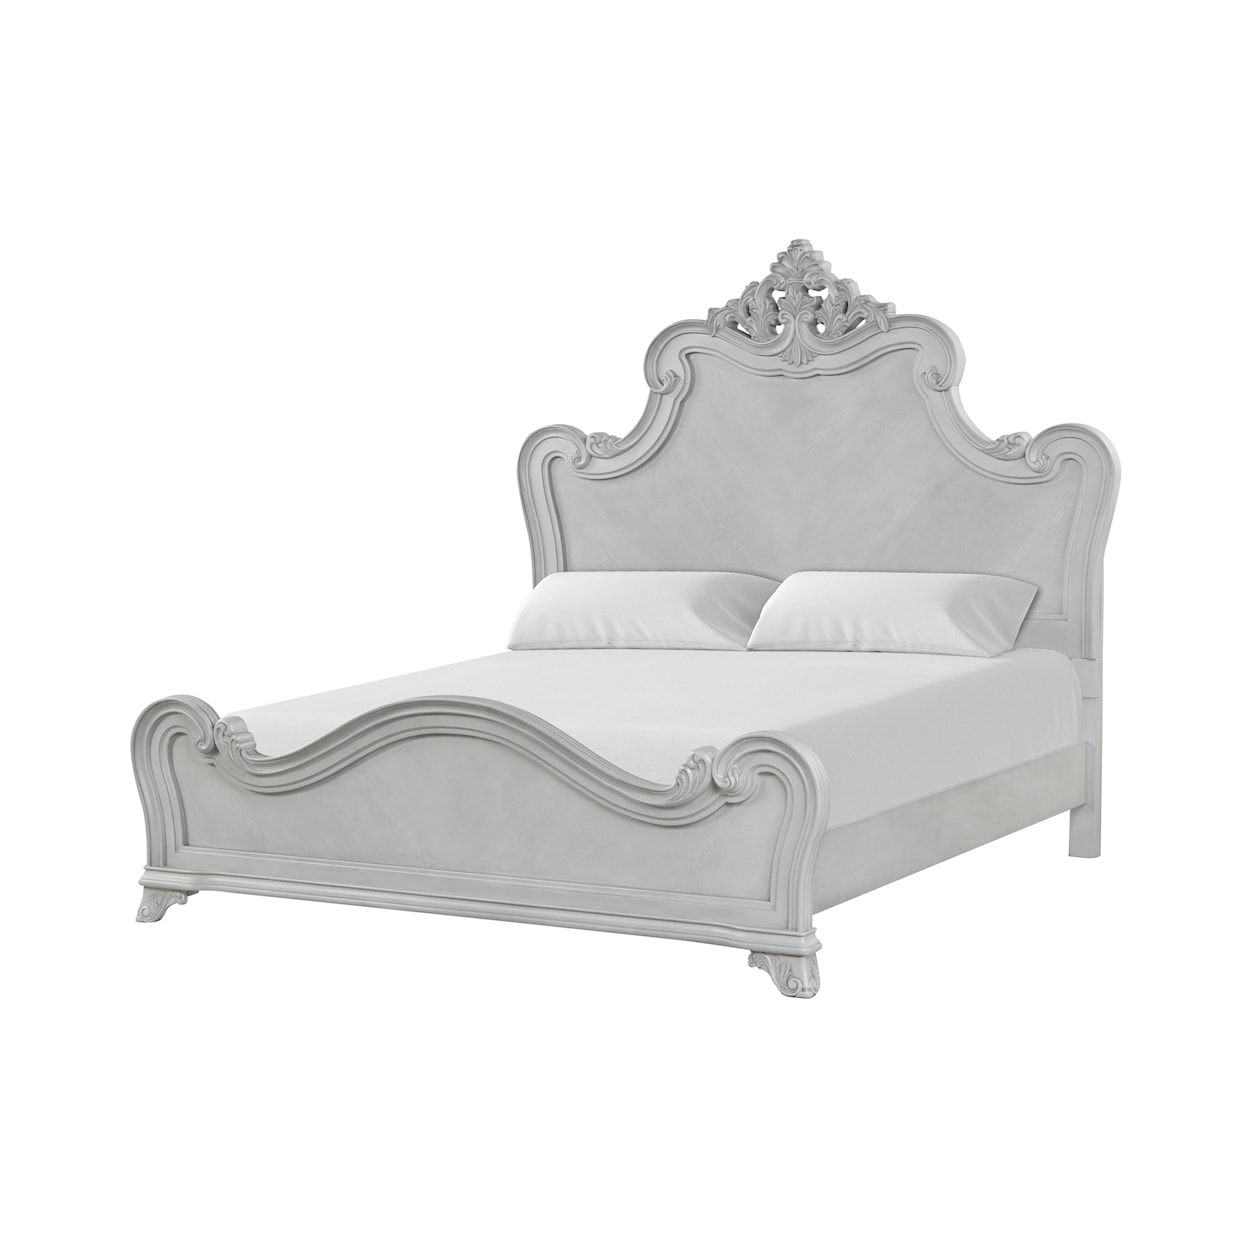 New Classic Cambria Hills 4-Piece King Arched Bedroom Set